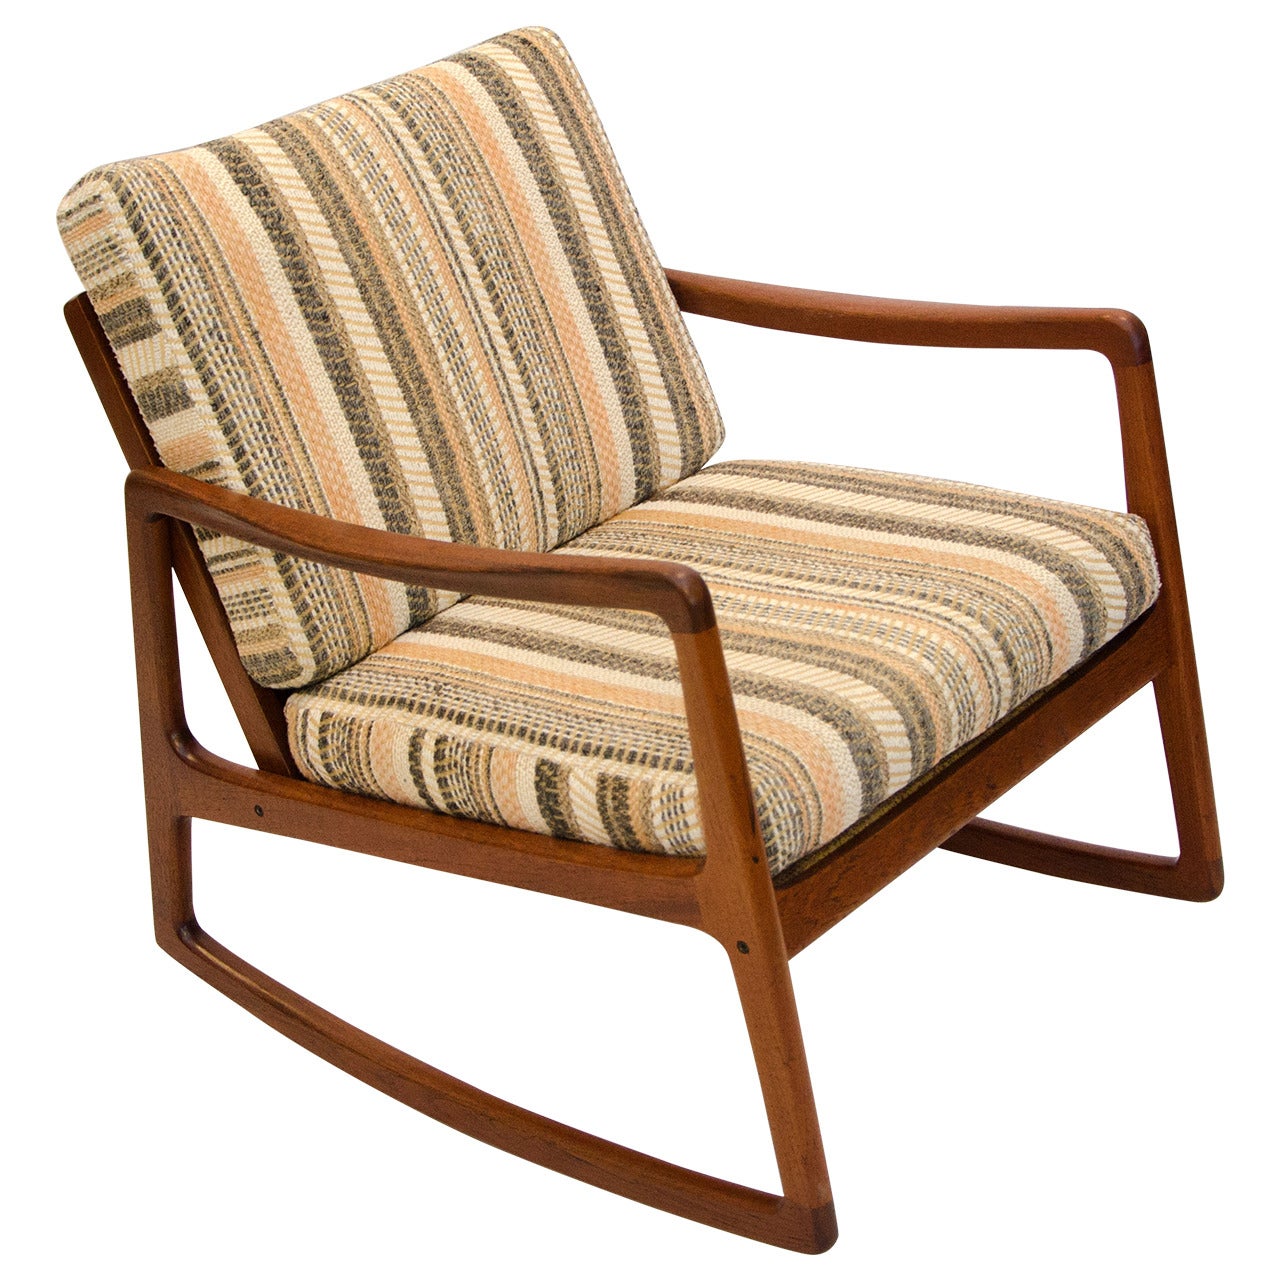 Danish Teak Rocking Chair by Ole Wanscher for France & Sons